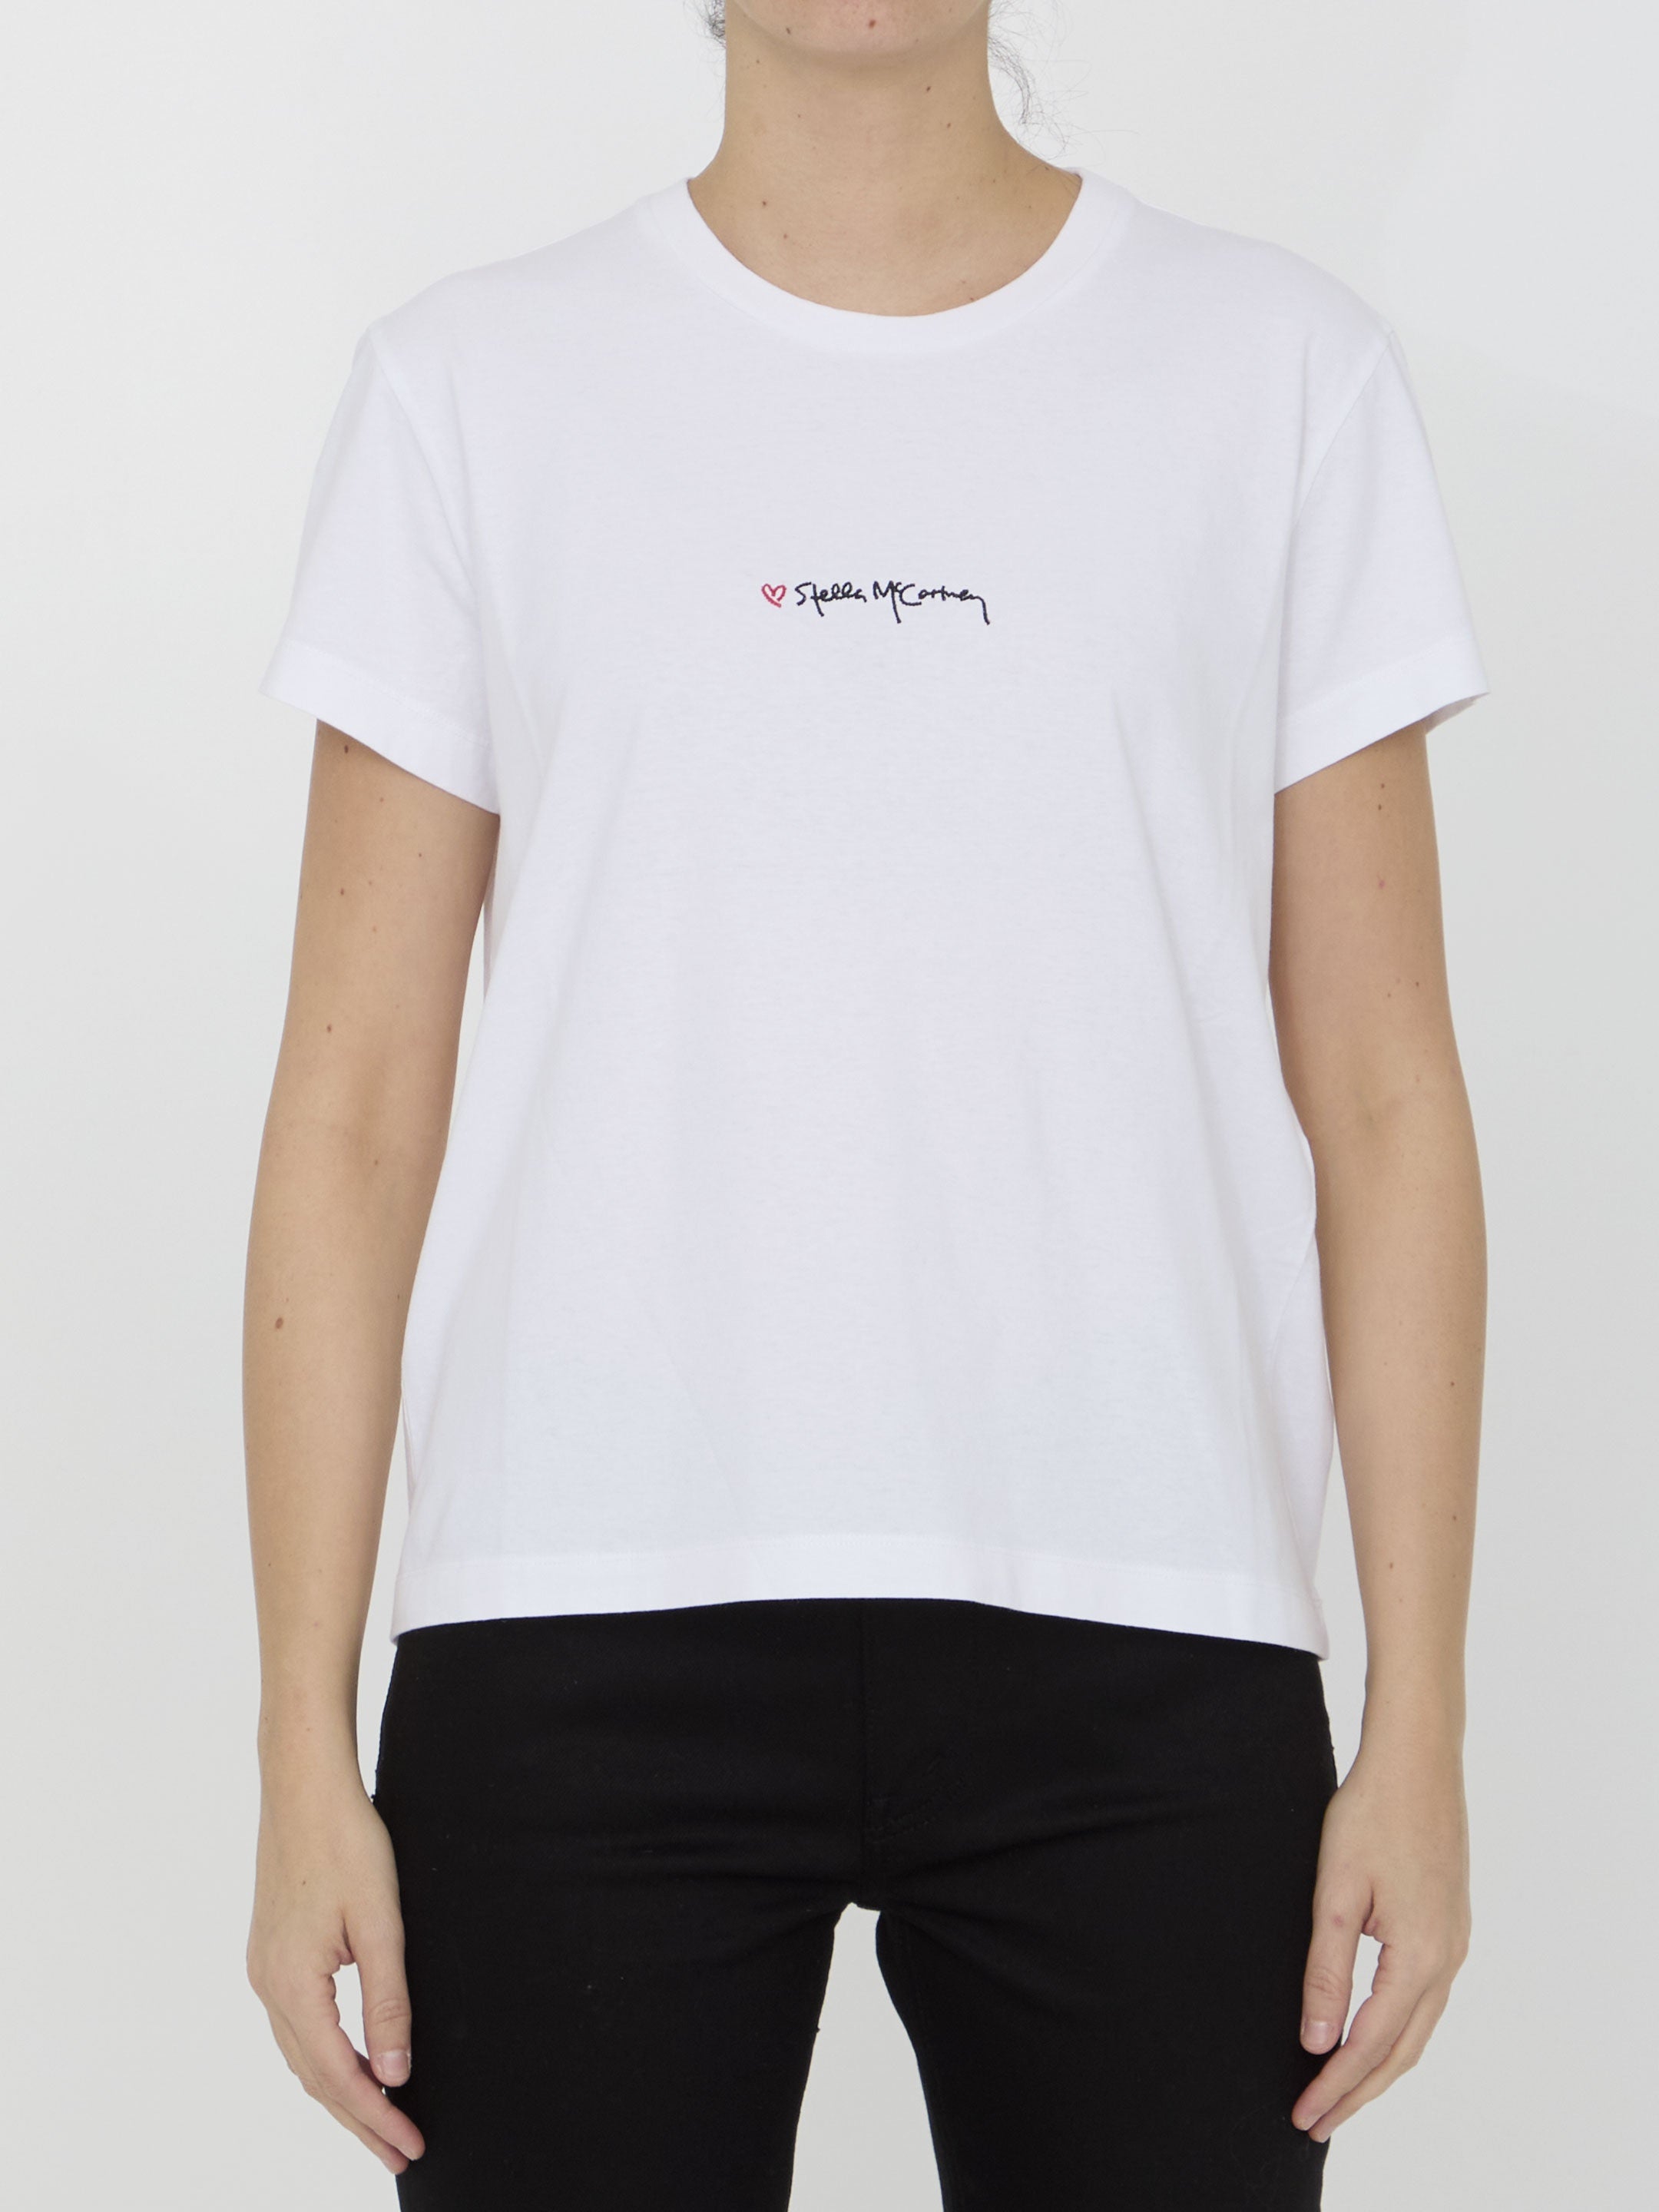 STELLA-MCCARTNEY-OUTLET-SALE-Embroidered-t-shirt-Shirts-M-WHITE-ARCHIVE-COLLECTION.jpg